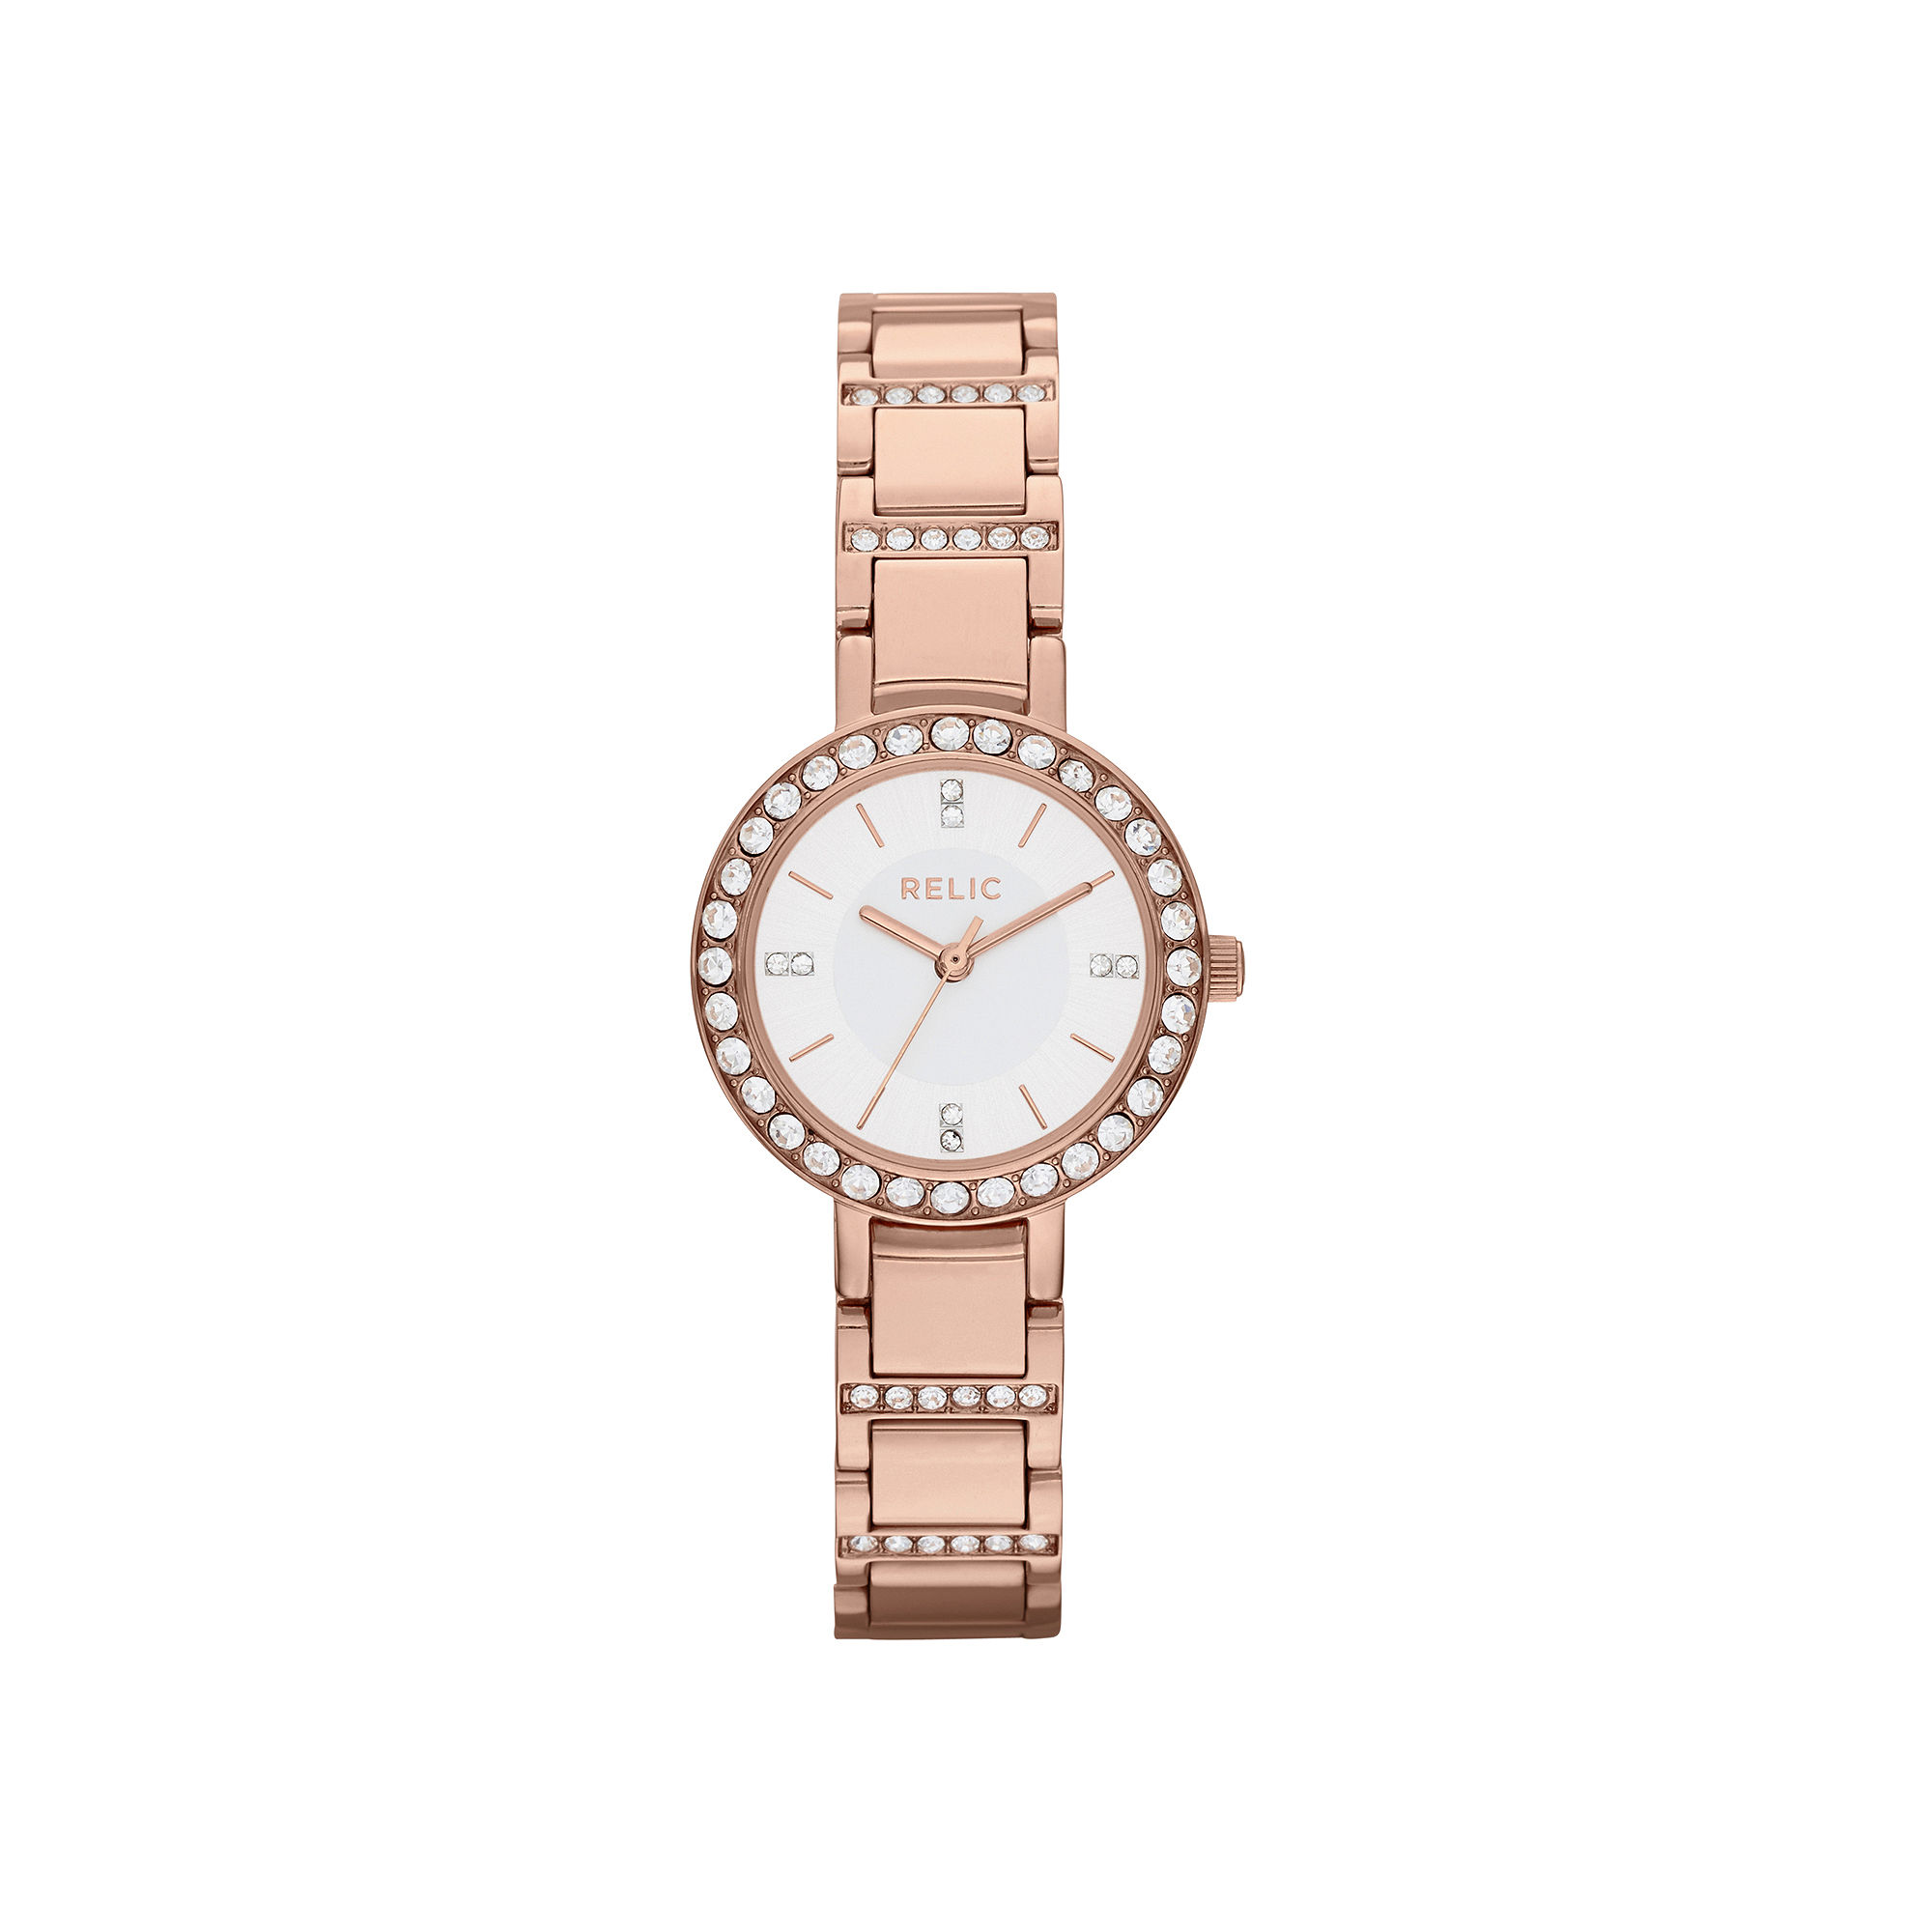 UPC 723765314624 product image for Relic Womens Rose-Tone Crystal Accent Watch | upcitemdb.com